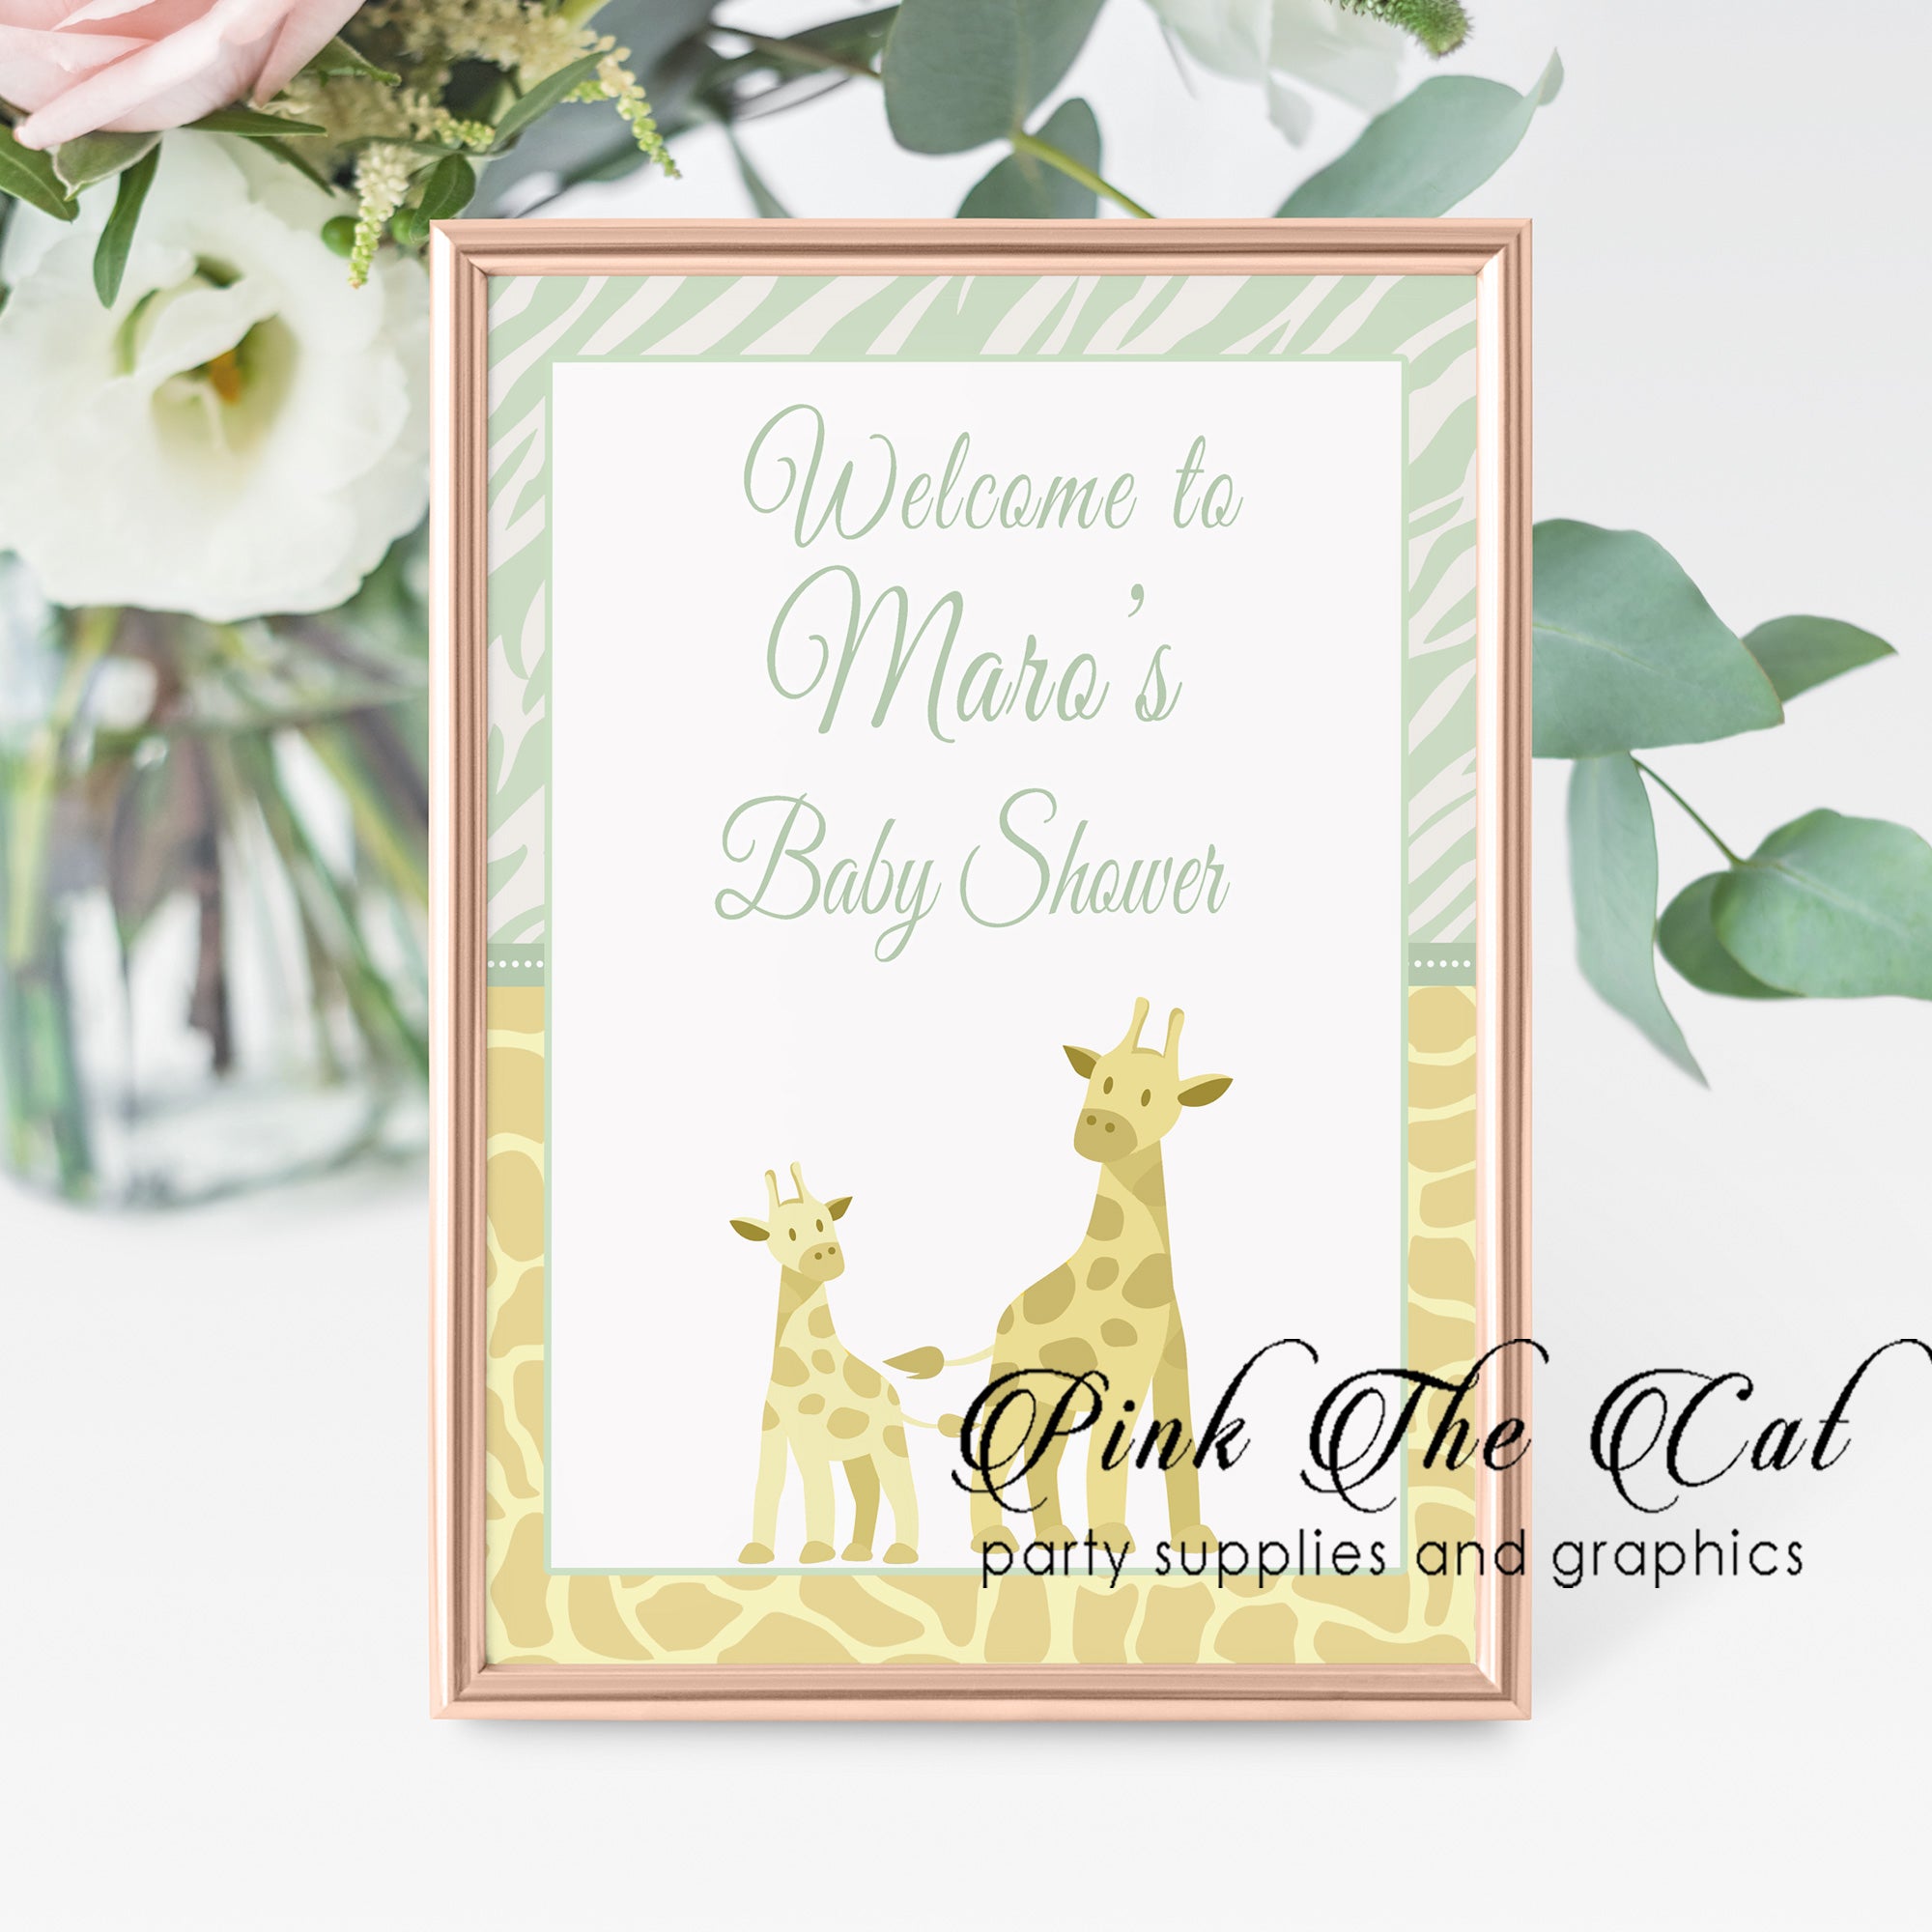 Mint yellow giraffes welcome sign printed